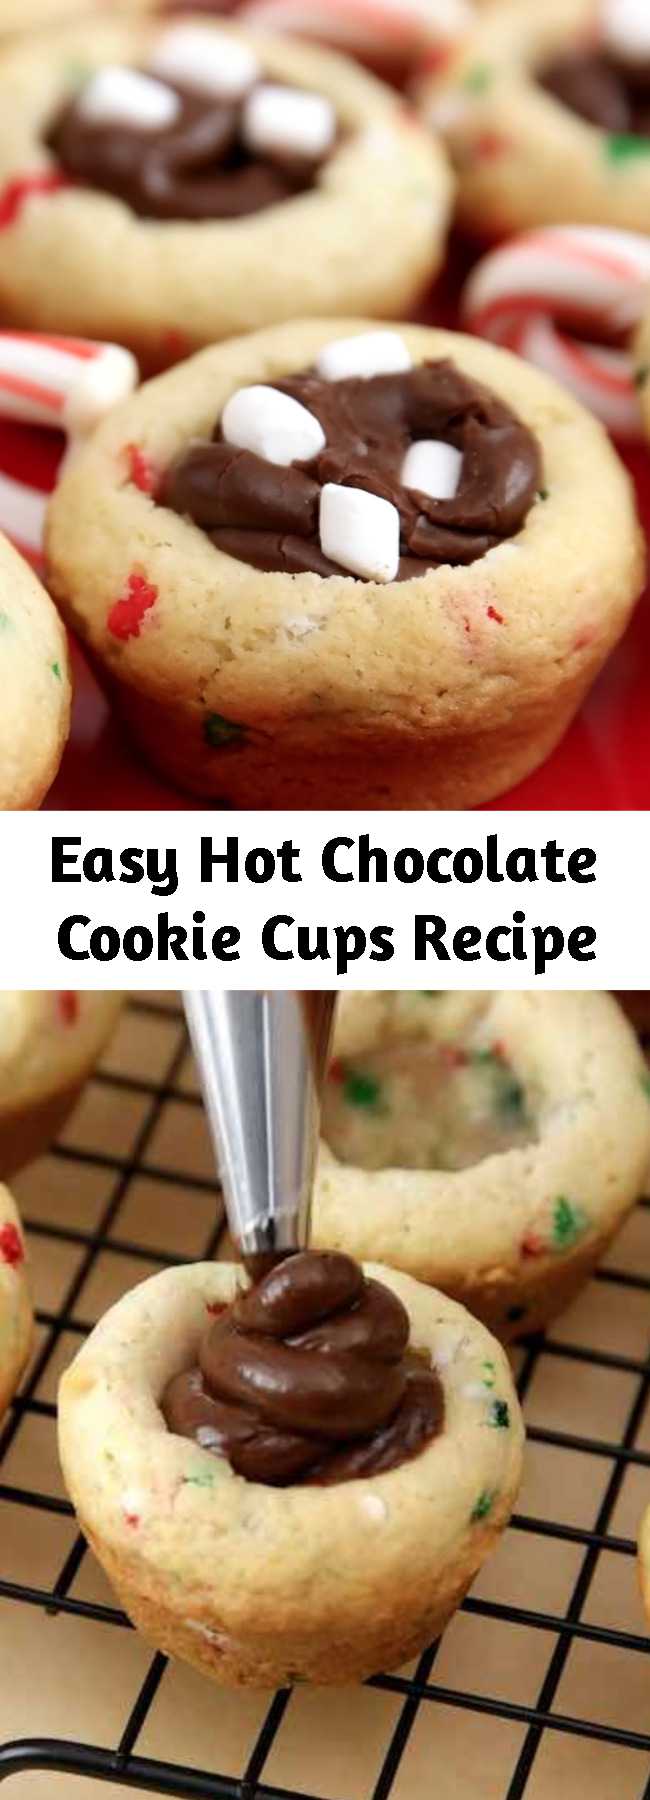 Easy Hot Chocolate Cookie Cups Recipe - Quick and easy dessert recipe that’s so festive and great for Christmas! These Hot Chocolate Cookie Cups are all-time favorite holiday treats combining sugar cookie dough, chocolate fudge and candy cane handles. They’re so festive and perfect for holiday parties and DIY gifts!